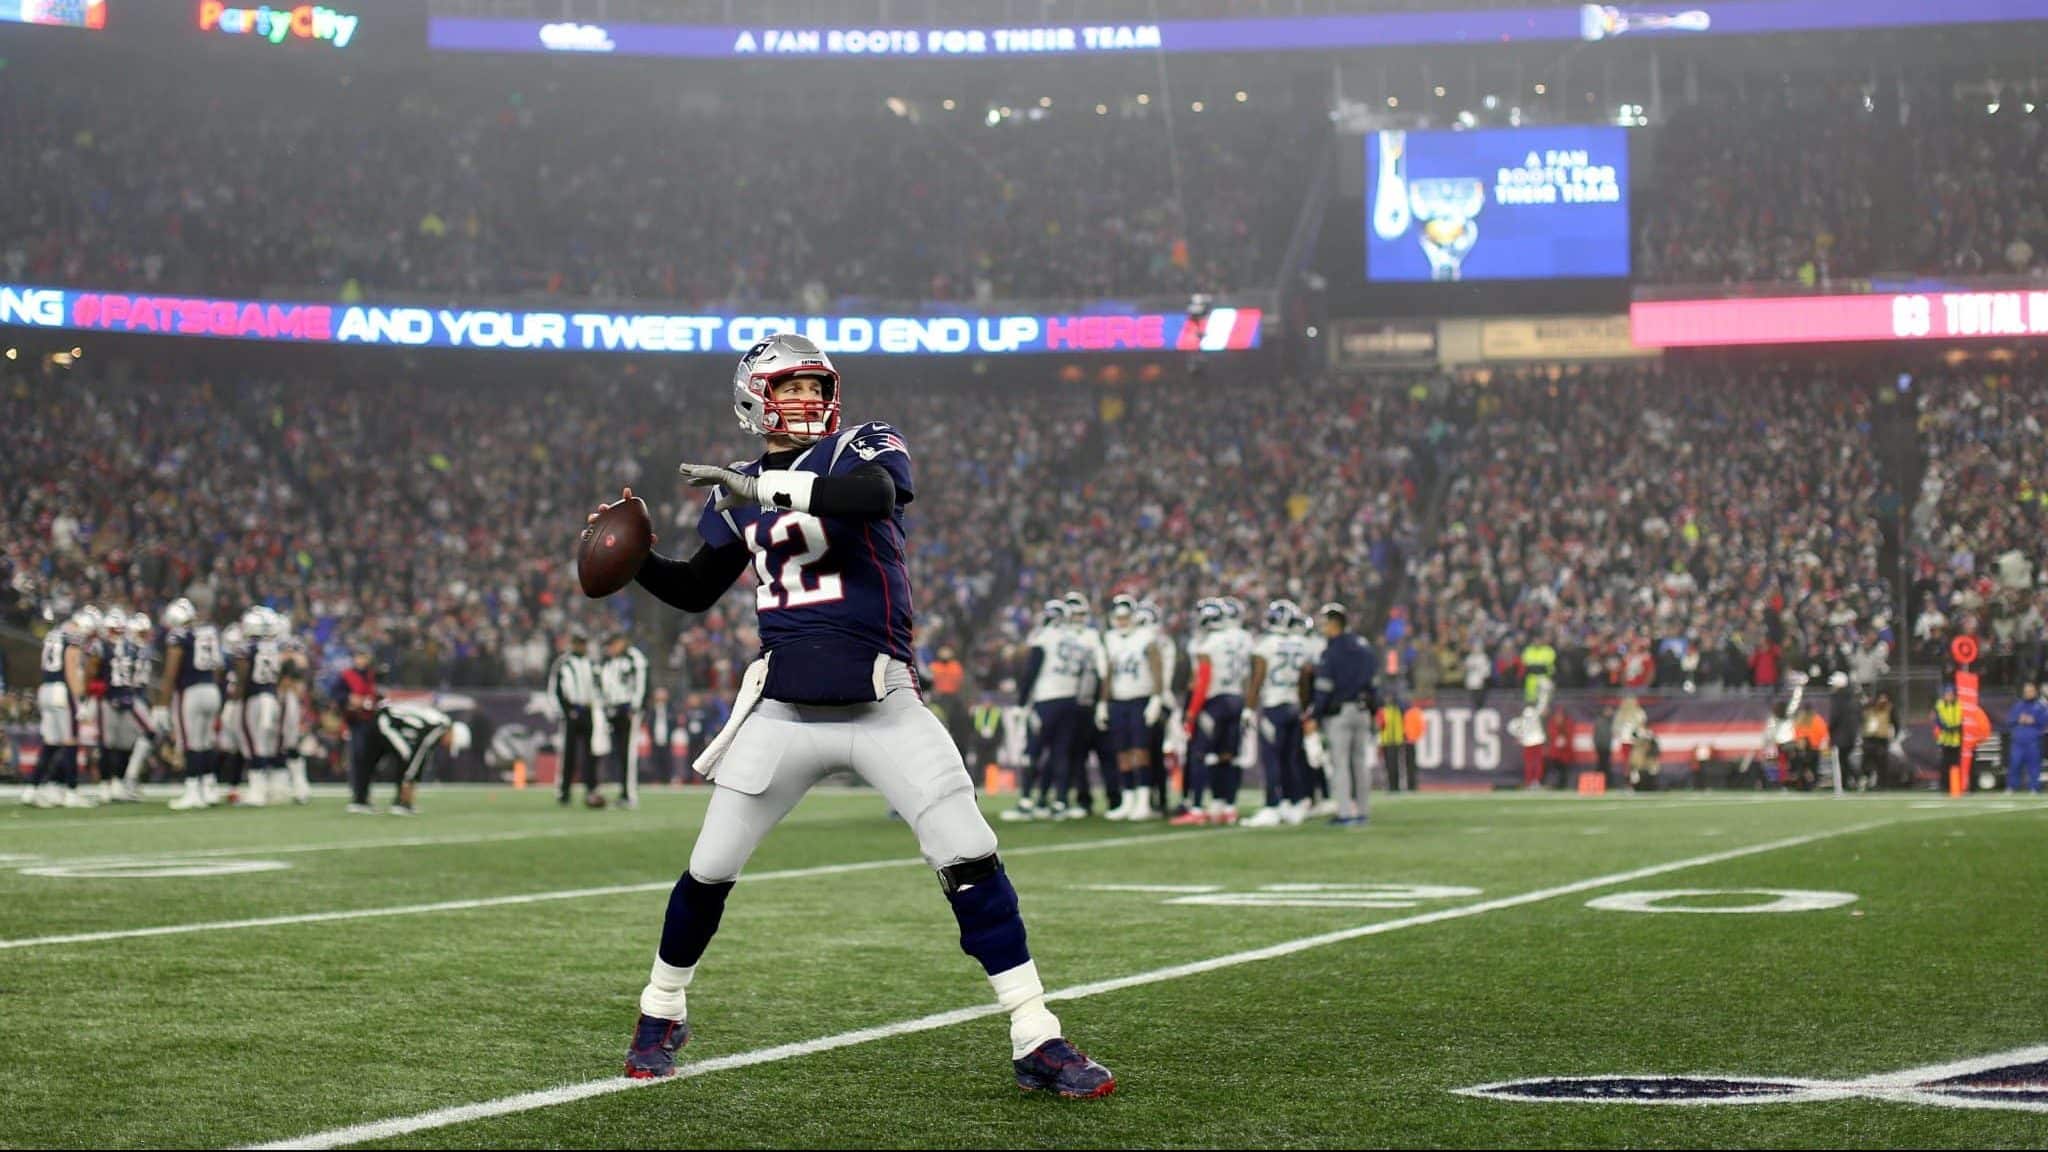 FOXBOROUGH, MASSACHUSETTS - JANUARY 04: Tom Brady #12 of the New England Patriots warms up during the AFC Wild Card Playoff game against the Tennessee Titans at Gillette Stadium on January 04, 2020 in Foxborough, Massachusetts.